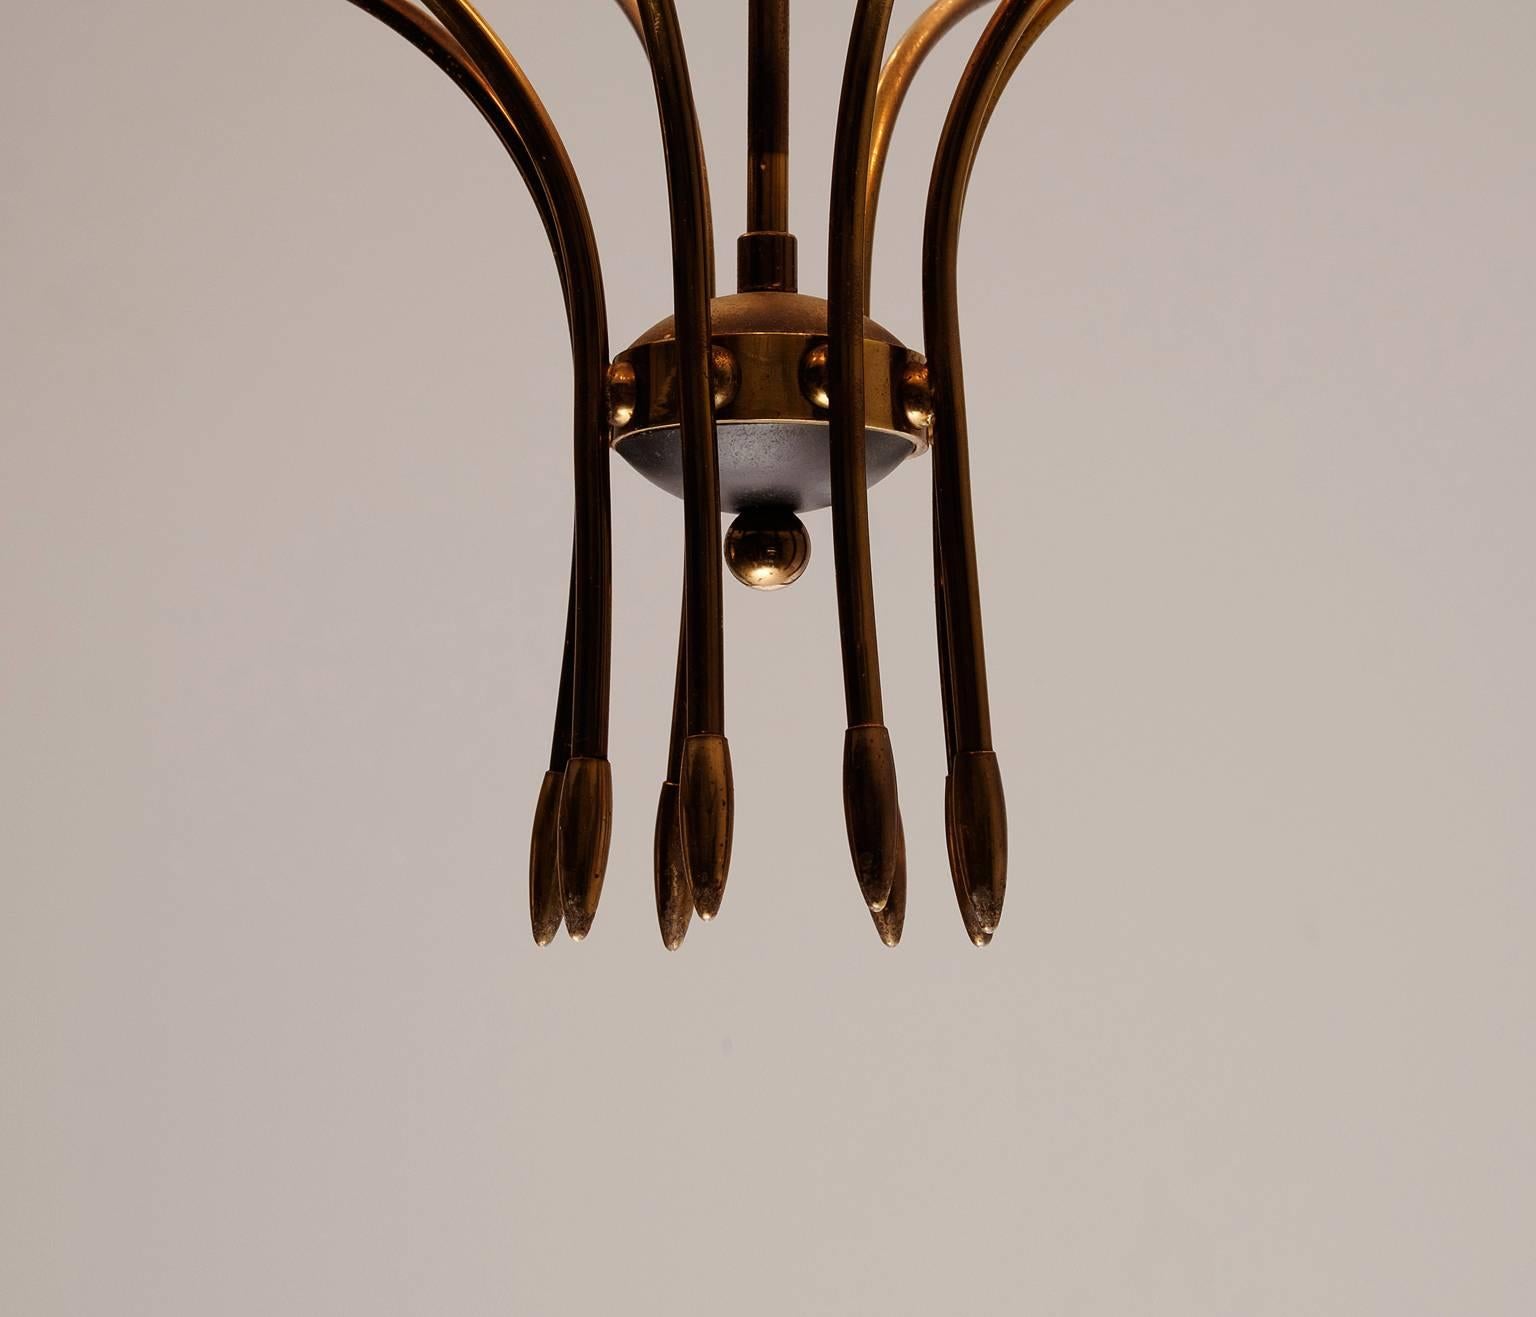 Painted French Chandelier in Brass with Eight Shades